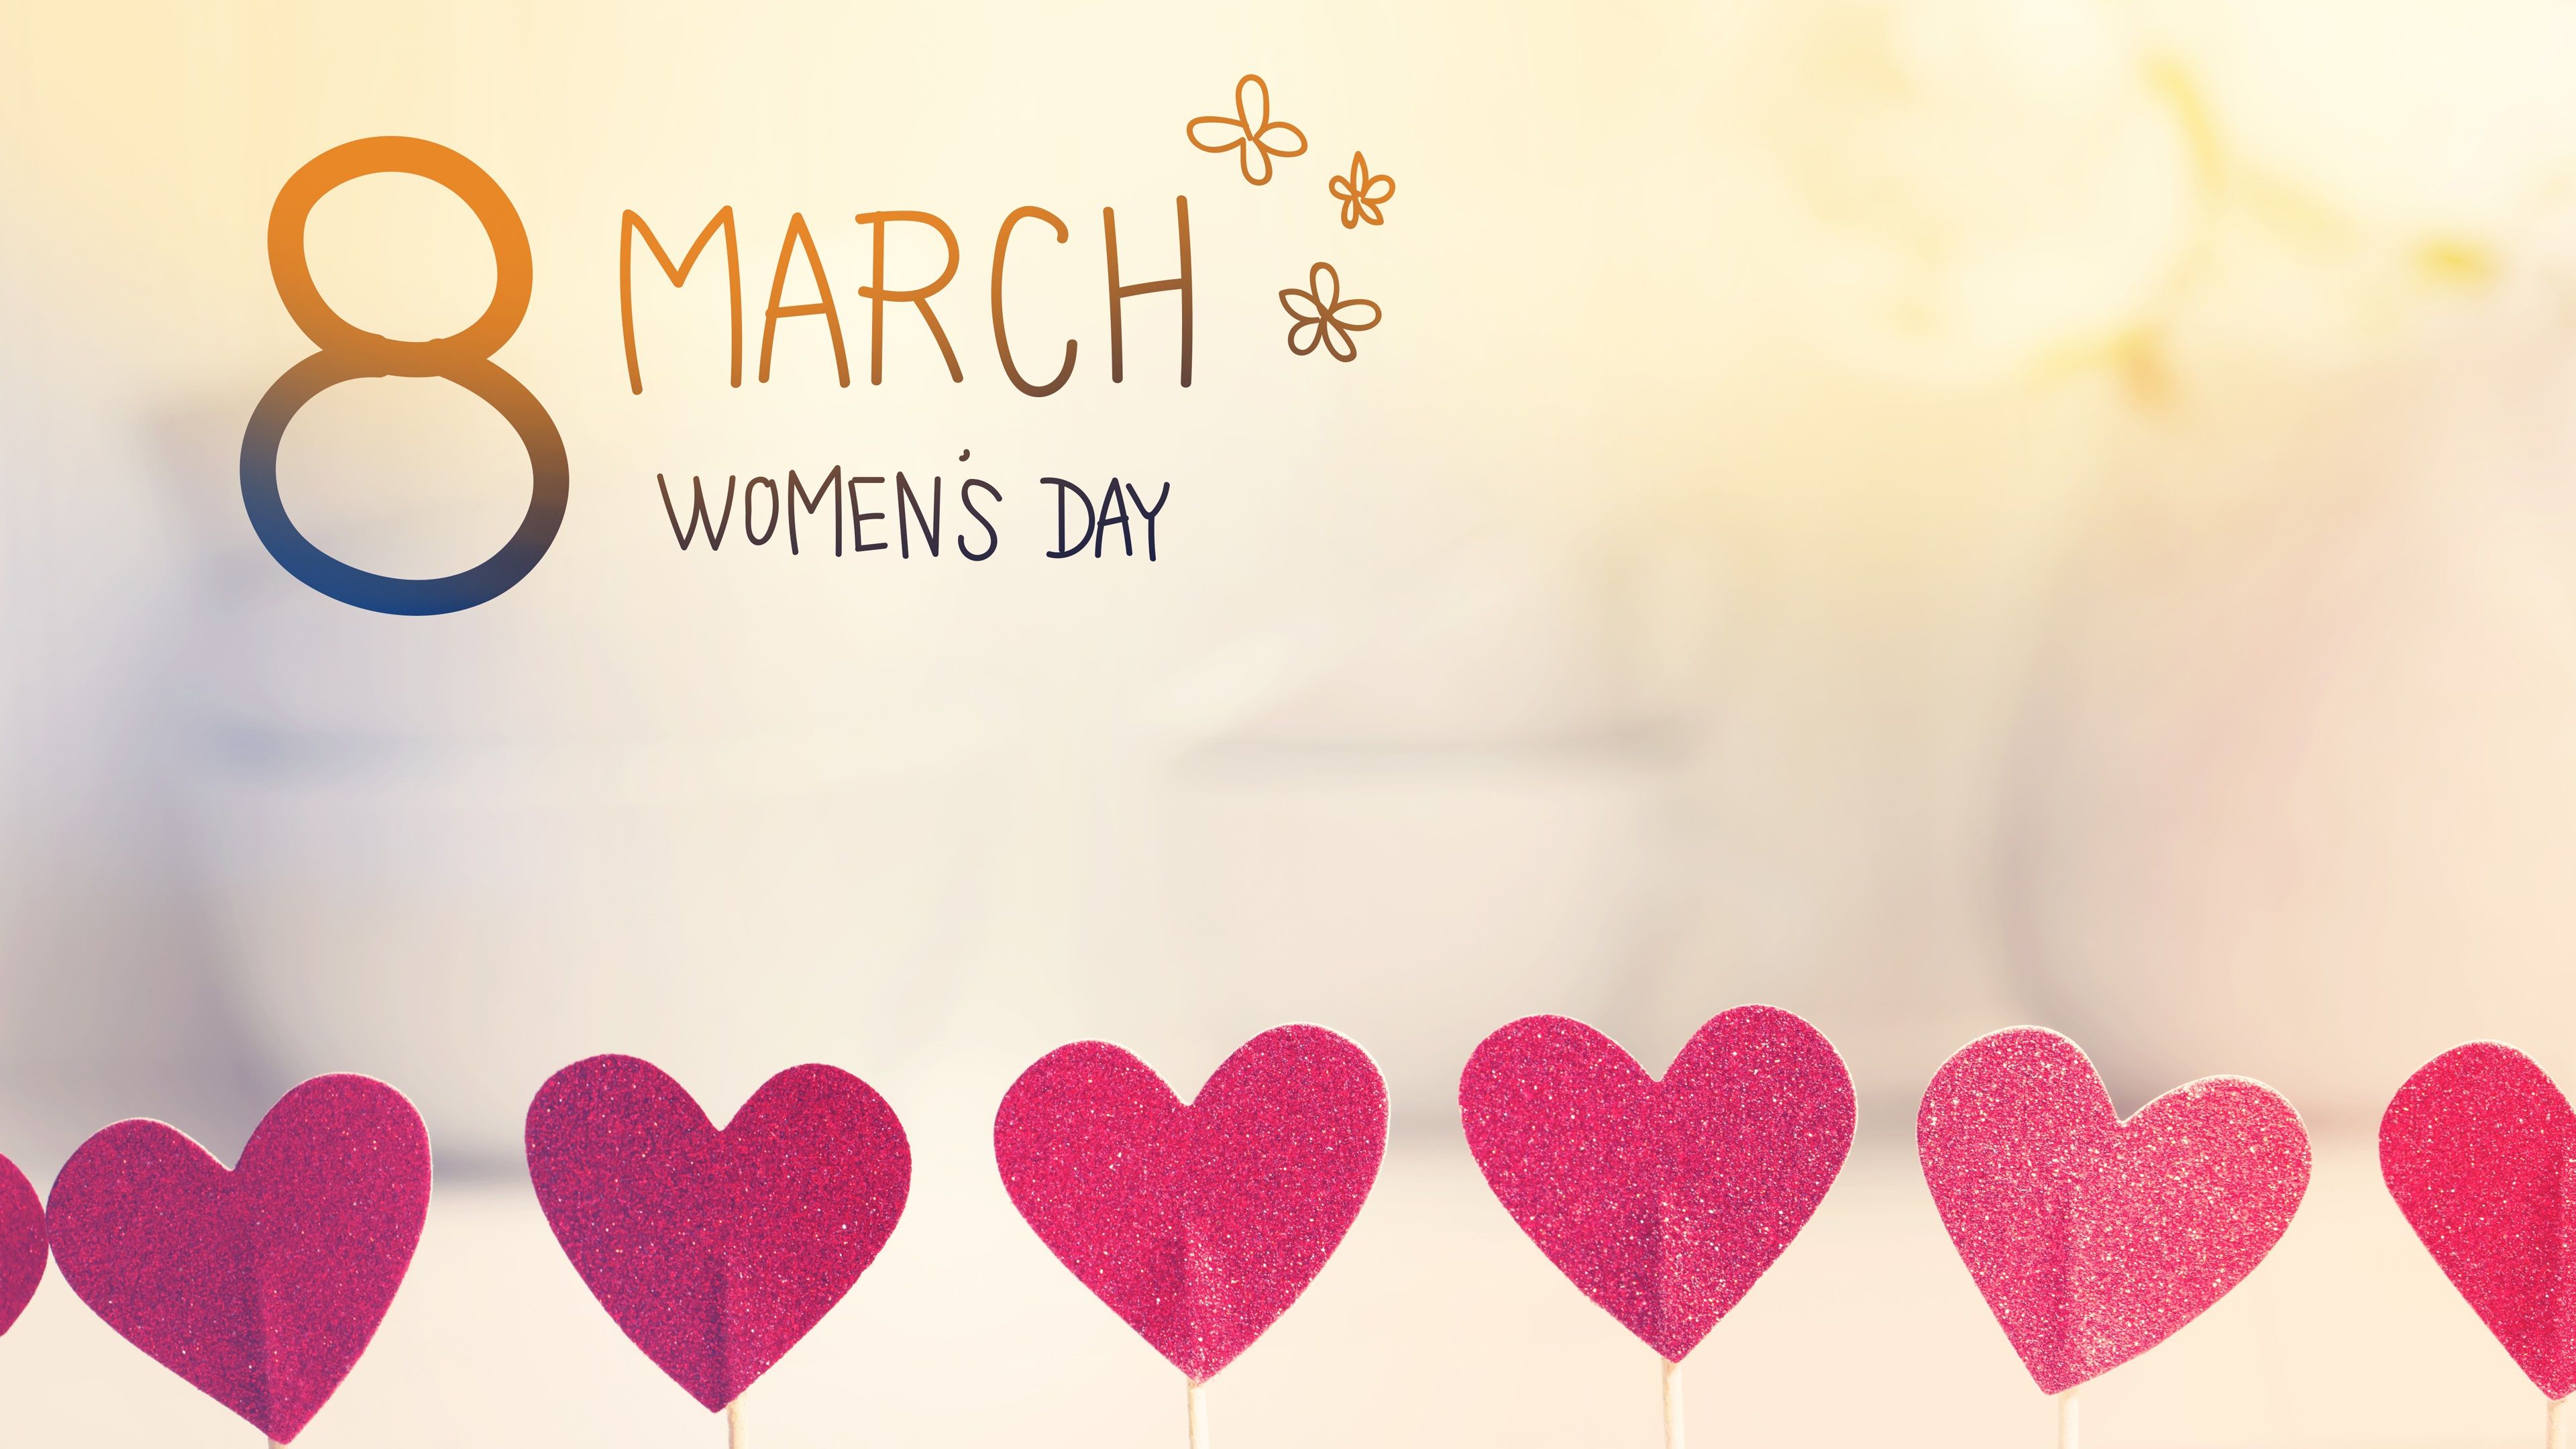 Wallpaper March Women S Day, Love Hearts The 8 March Womens Day